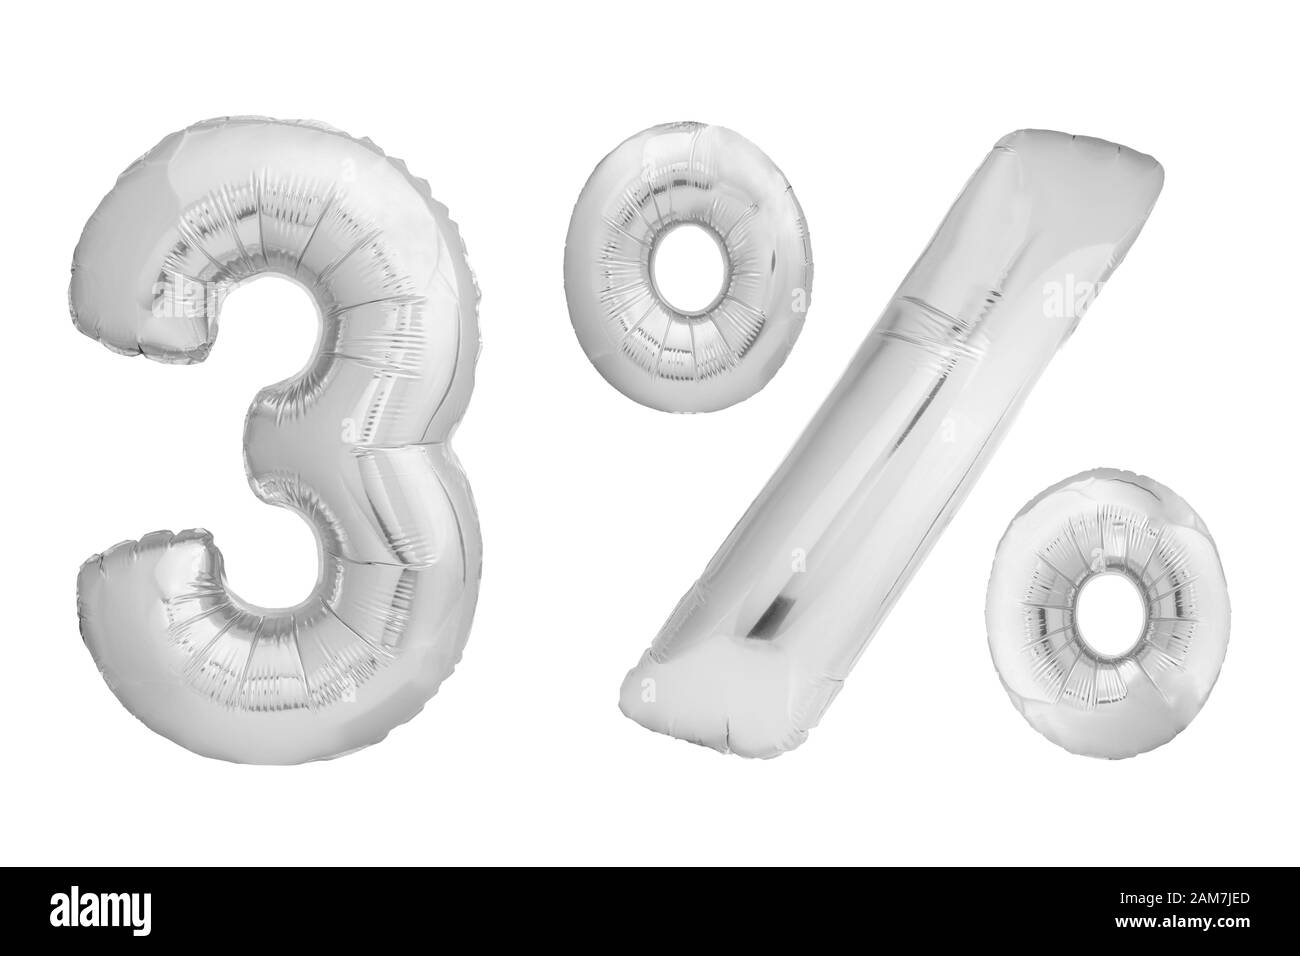 Chrome number 0 made of inflatable balloon isolated on white background Stock Photo